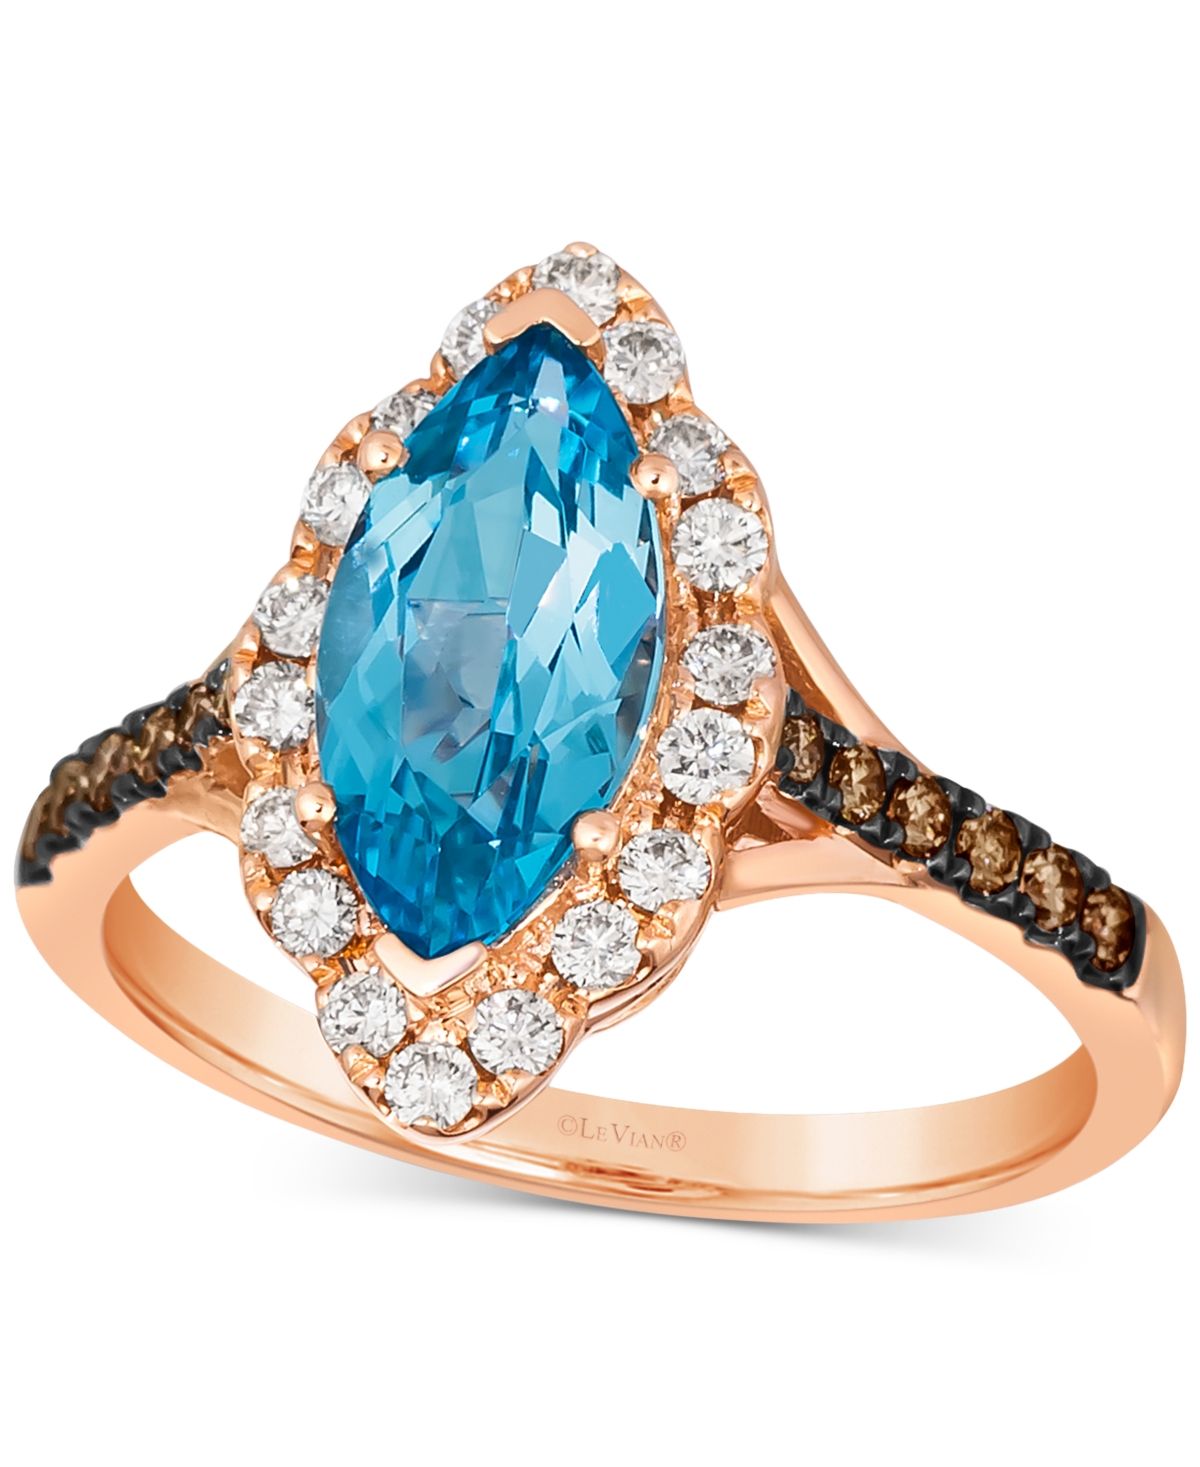 Le Vian Blue Topaz (1-3/4 Ct. T.w.) & Diamond (1/2 Ct. T.w.) Marquise Halo Ring In 14k Rose Gold